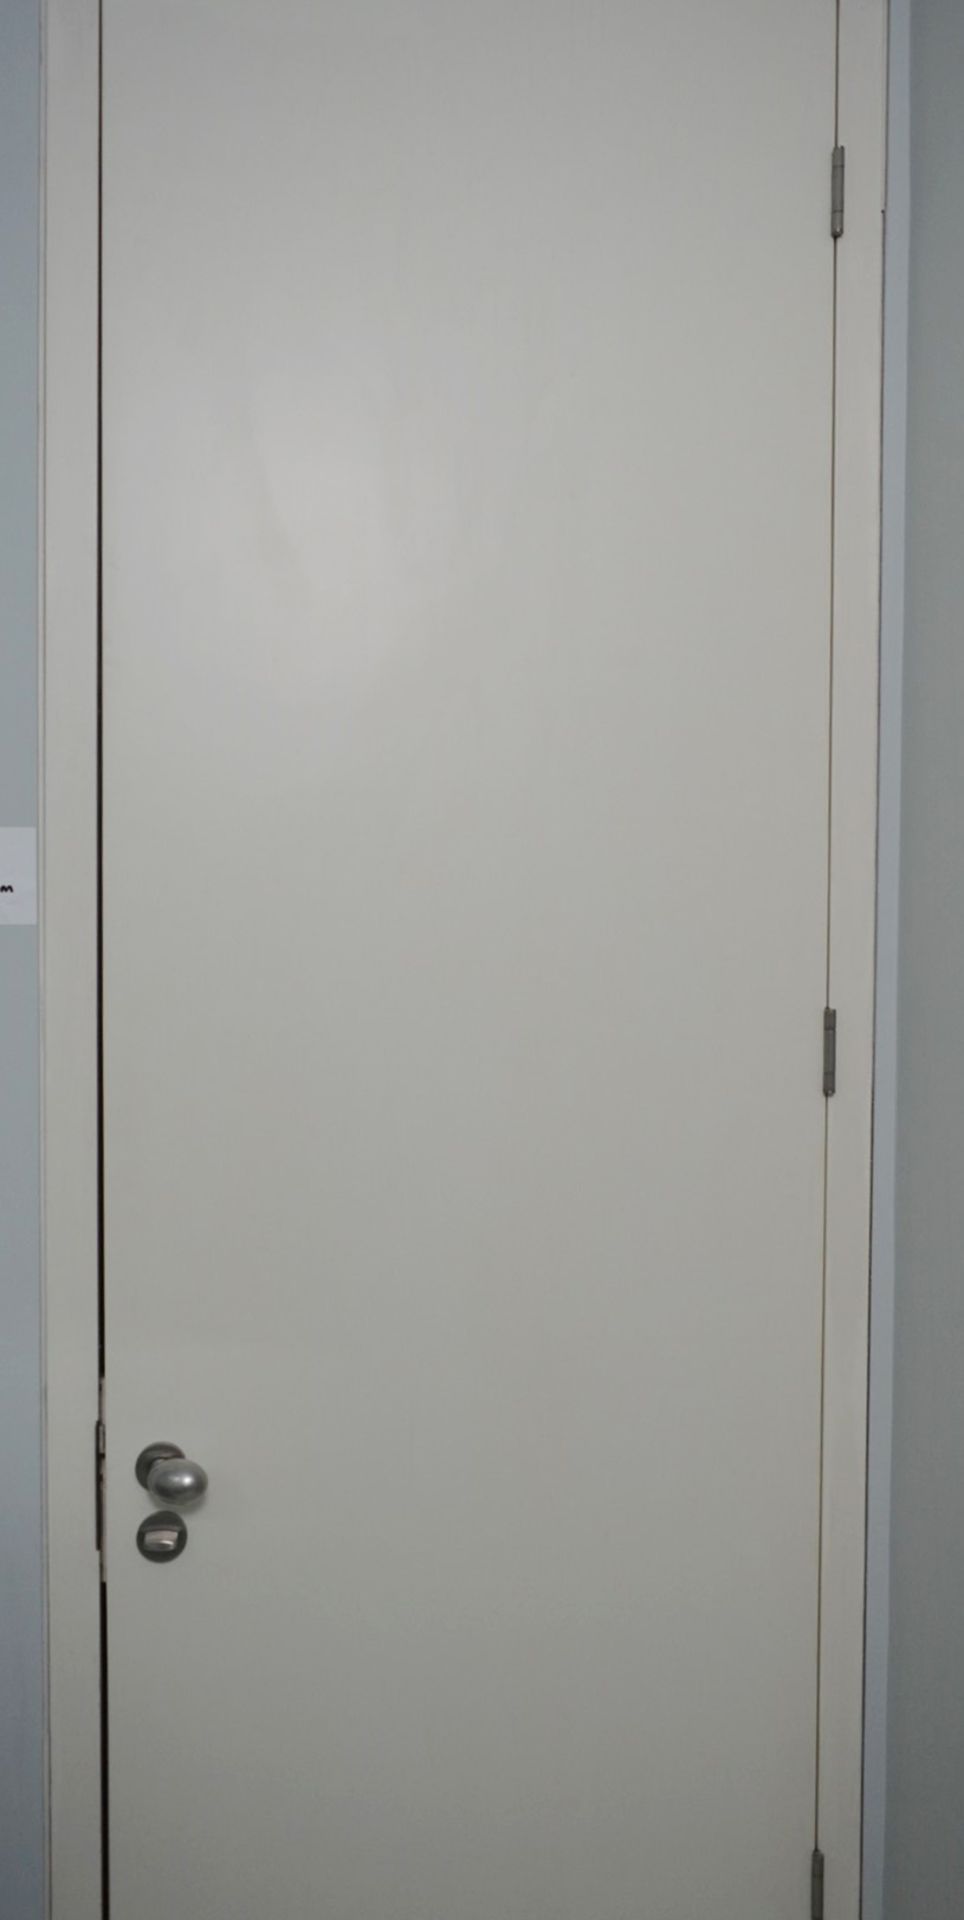 1 x Fire Resistant Internal Door - Fitted With Stylish Chrome Door Knobs, Triple Hinges and - Image 3 of 5